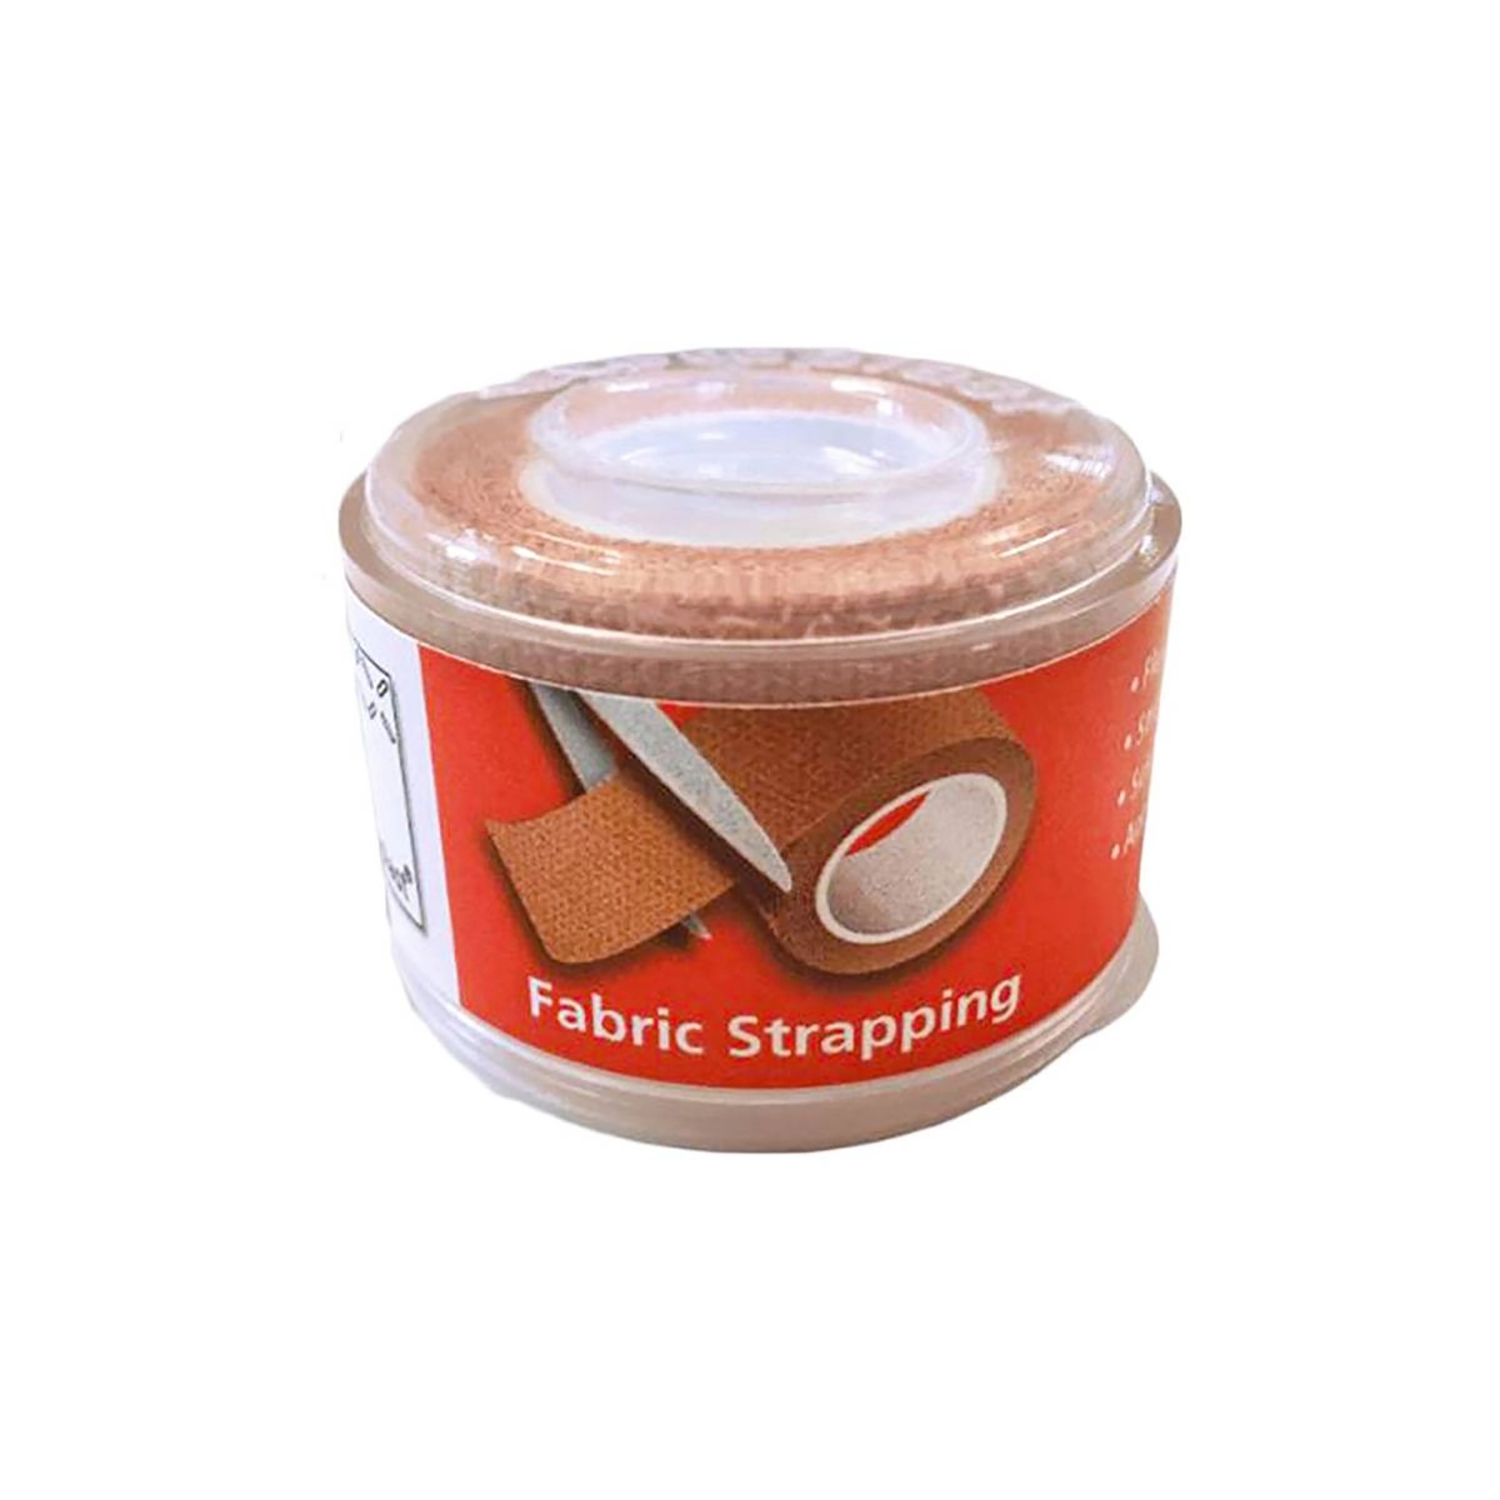 Steroplast Fabric Strapping Tape Cap & Spool | 2.5cm x 1.5m | Flesh Colour | Pack of 12